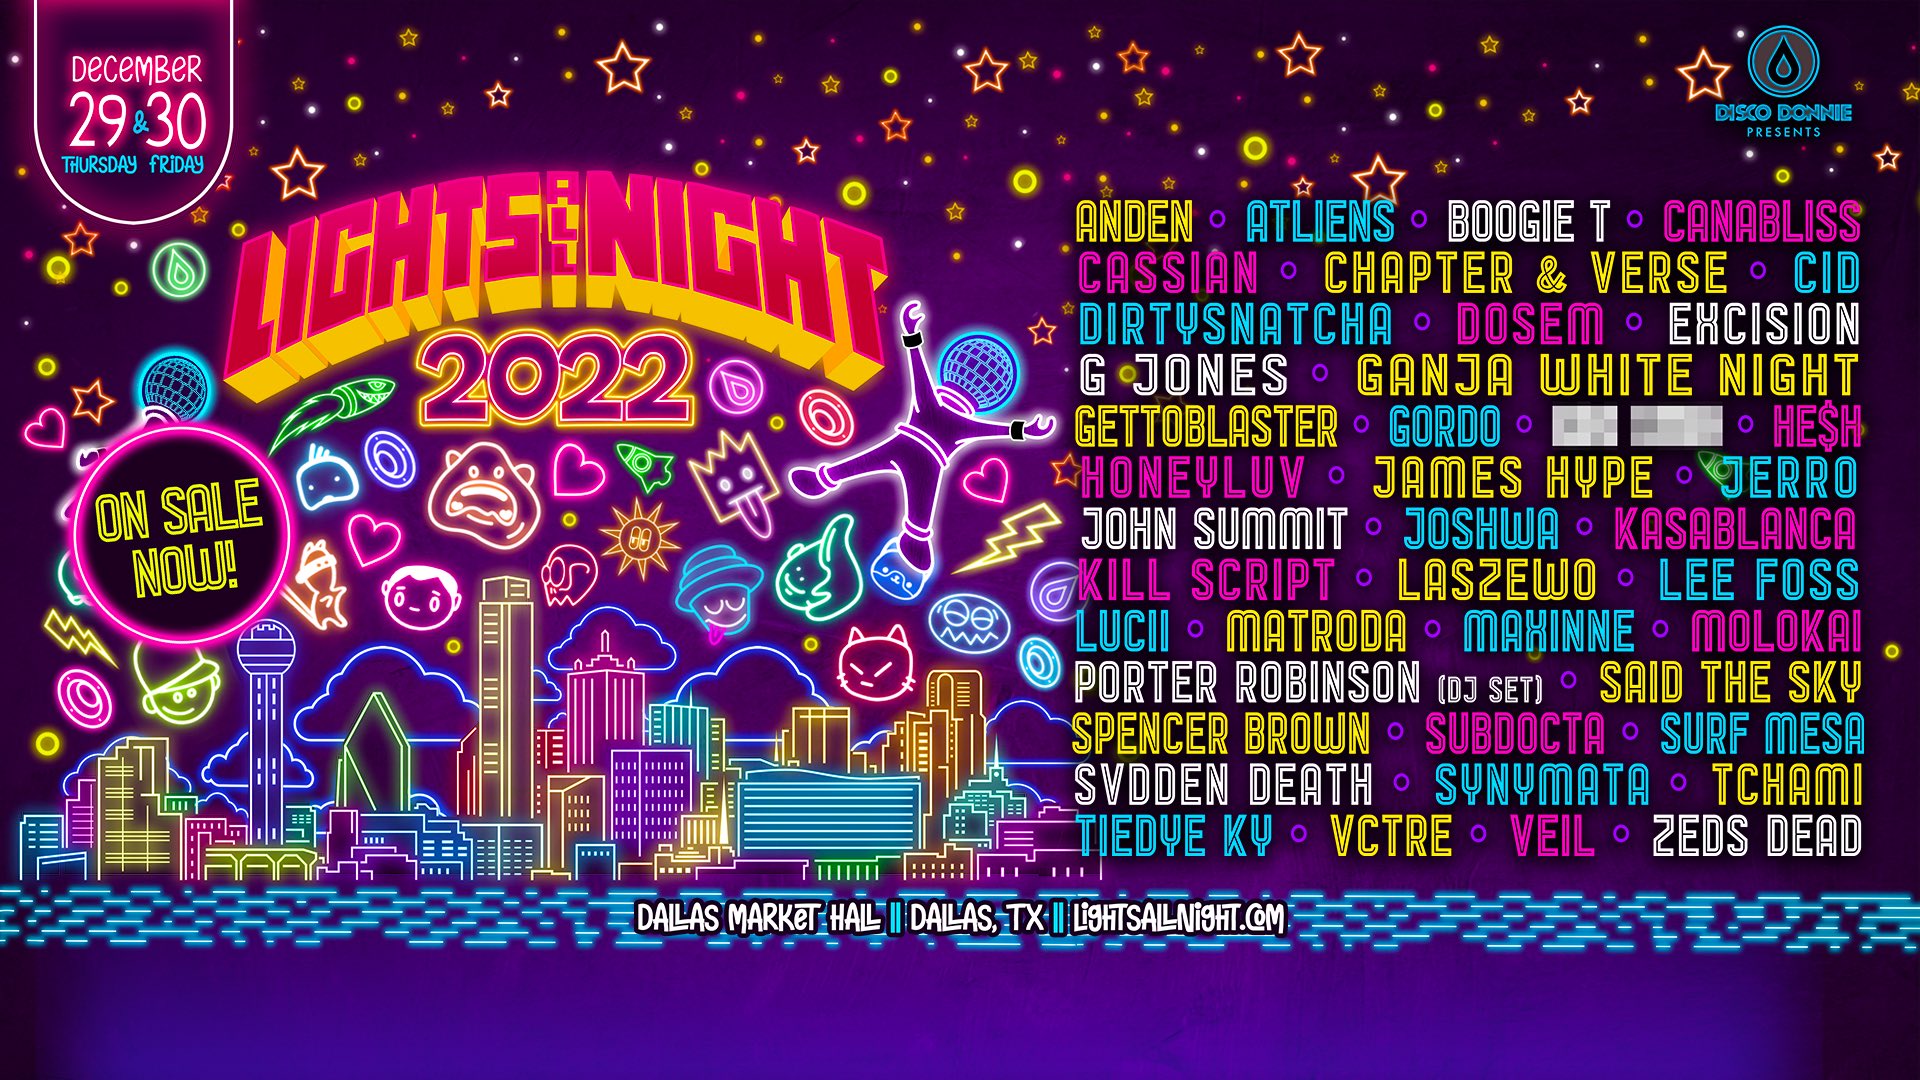 Lights All Night Festival 2022 Lineup, Tickets and Dates